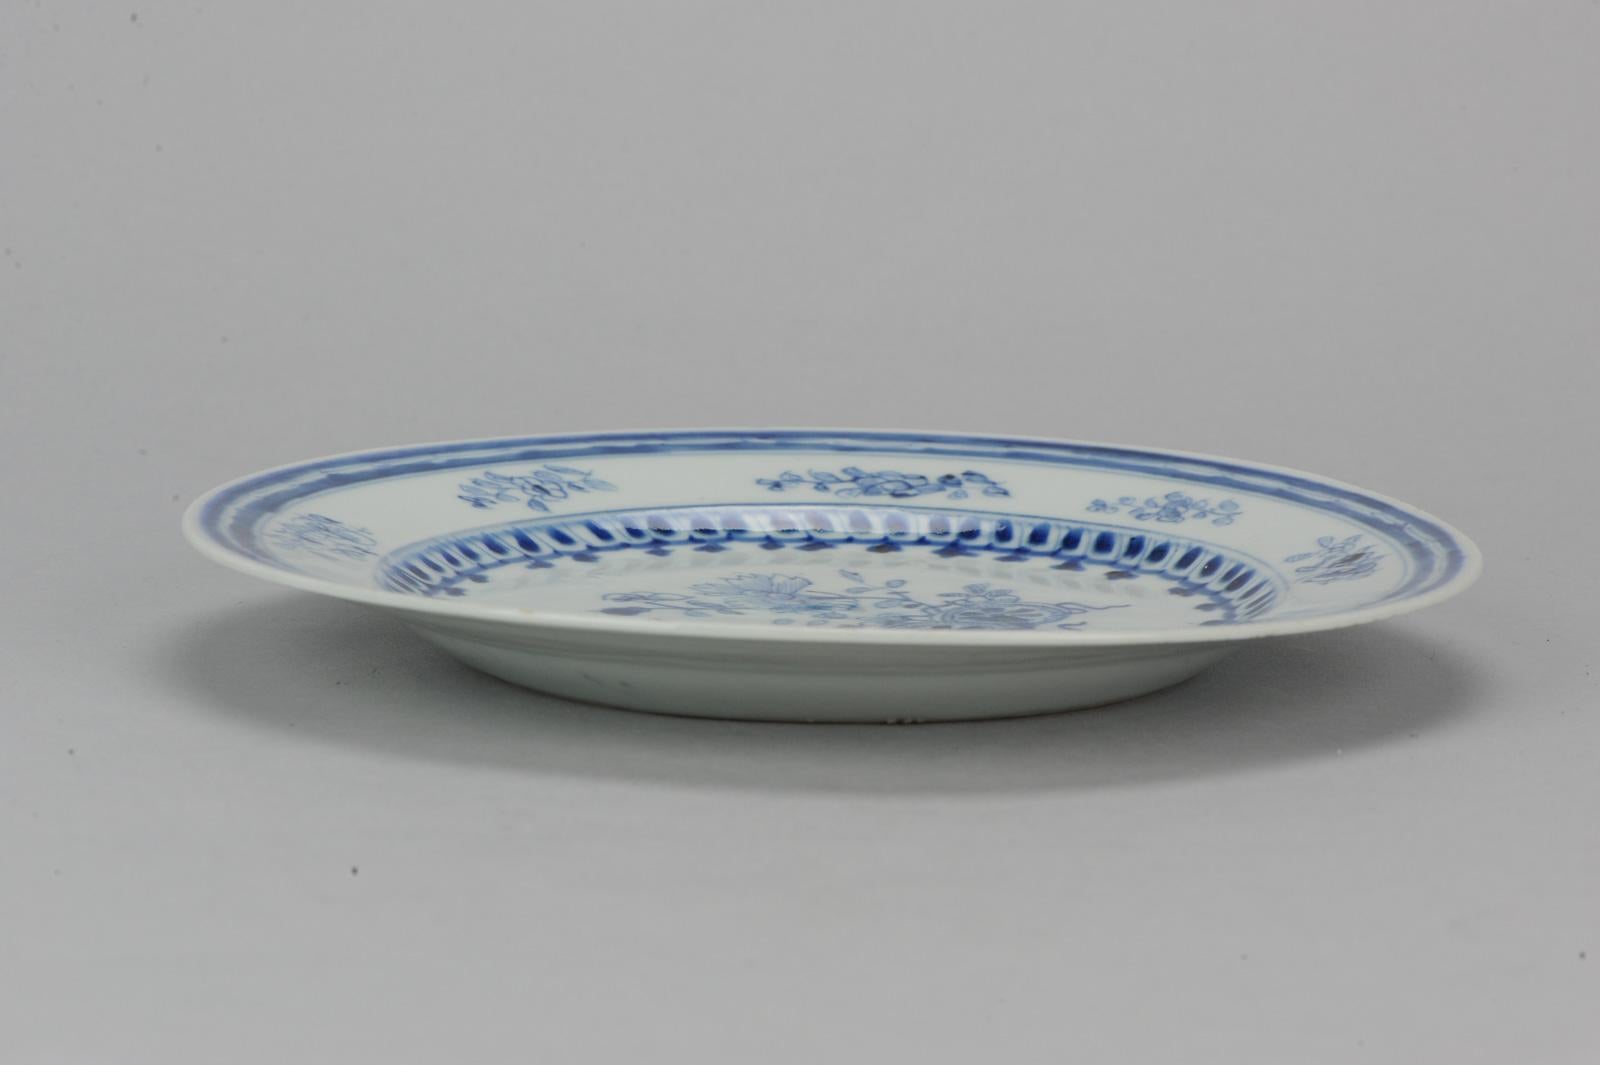 A very nicely decorated plate.

Additional information:
Material: Porcelain & Pottery
Color: Blue & White
Region of Origin: China
Maker: Qianlong (1735-1796)
Period: 18th century Qing (1661 - 1912)
Age: Pre-1800
Original/Reproduction: